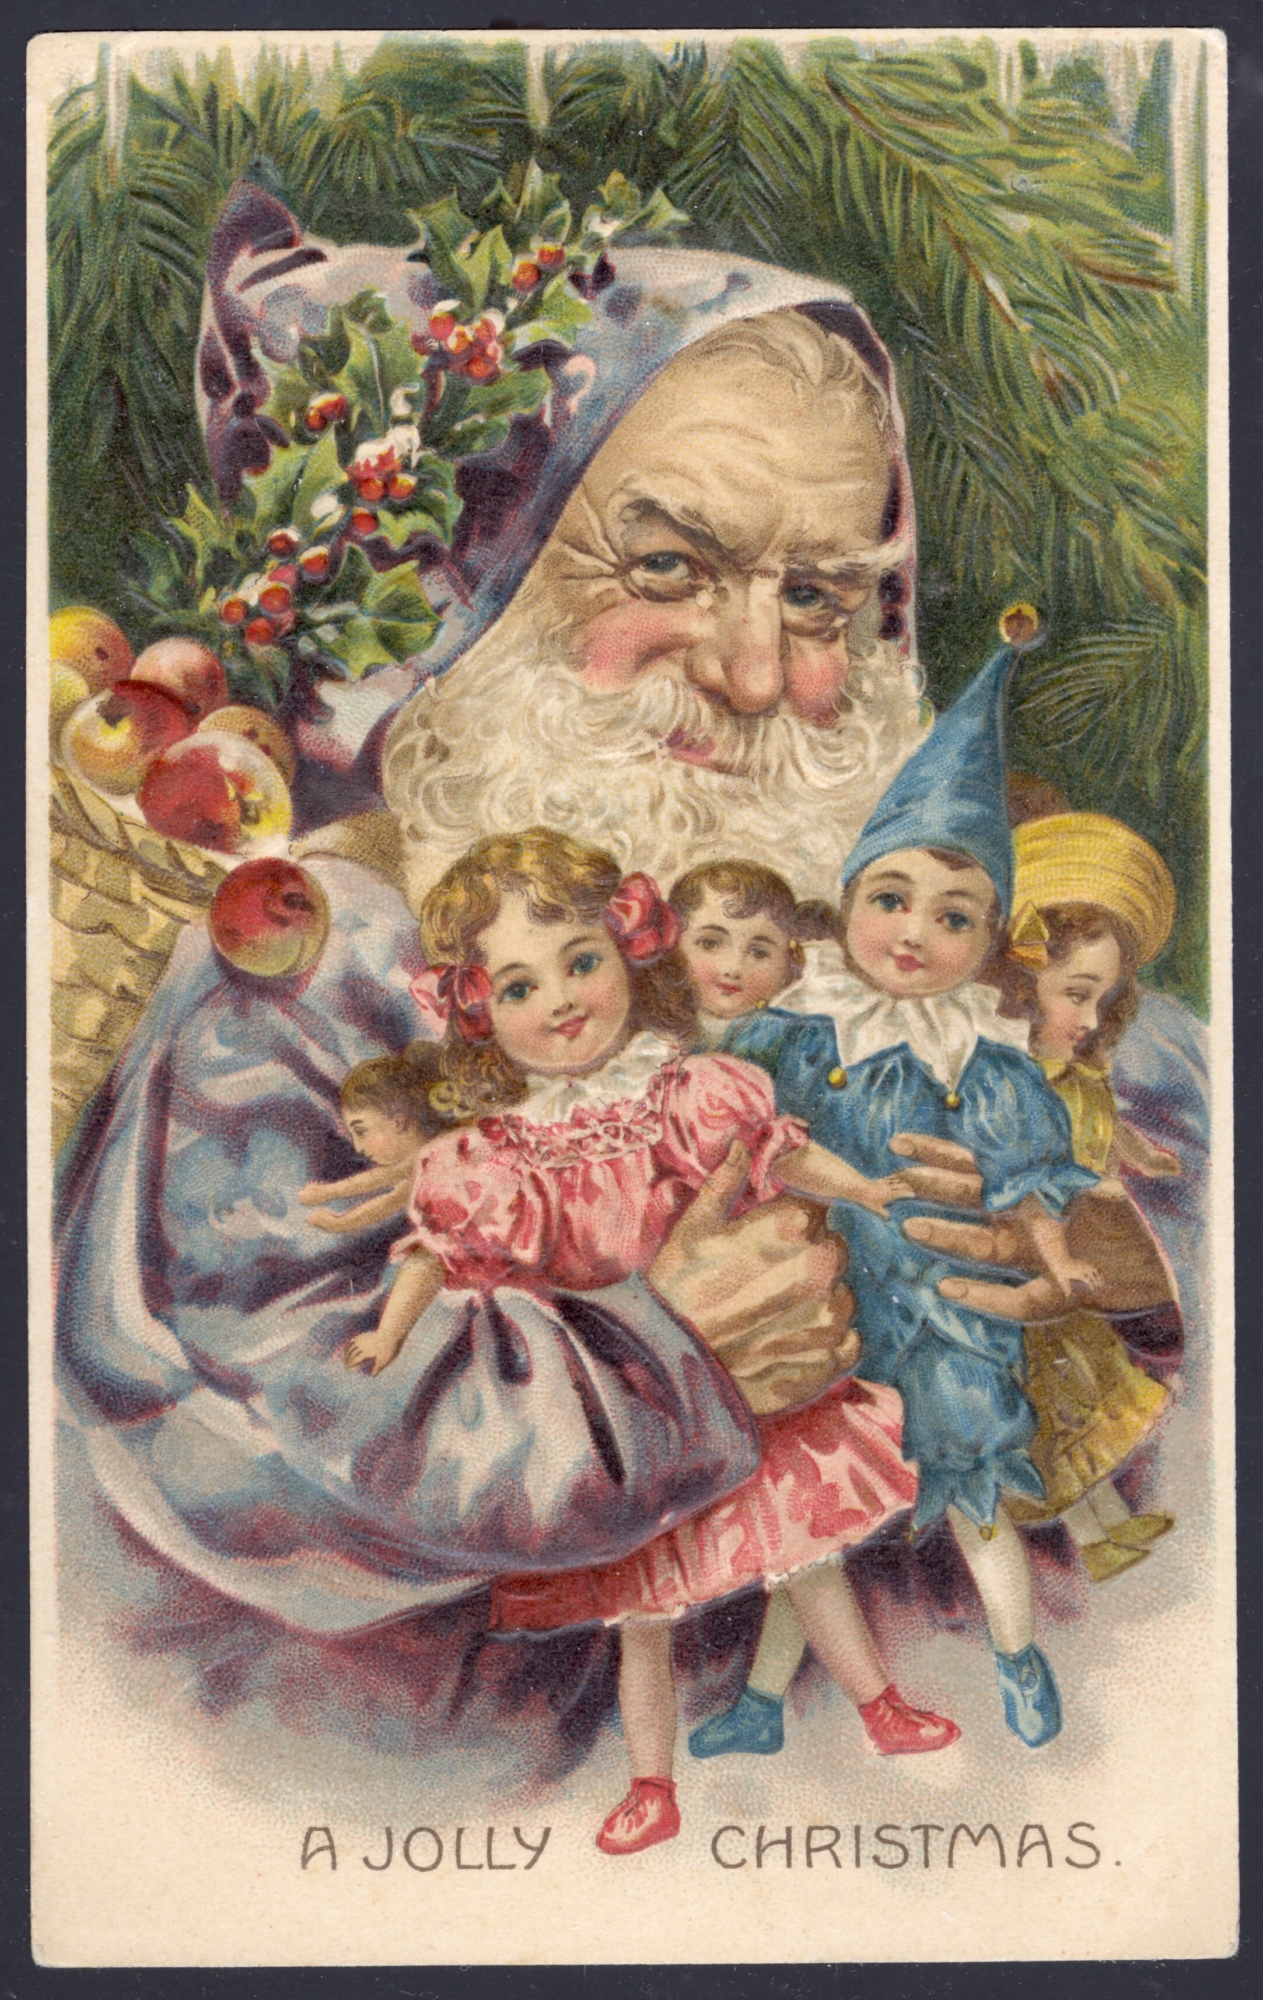 Santa wearing a blue robe. Lithographed in Germany (flat)